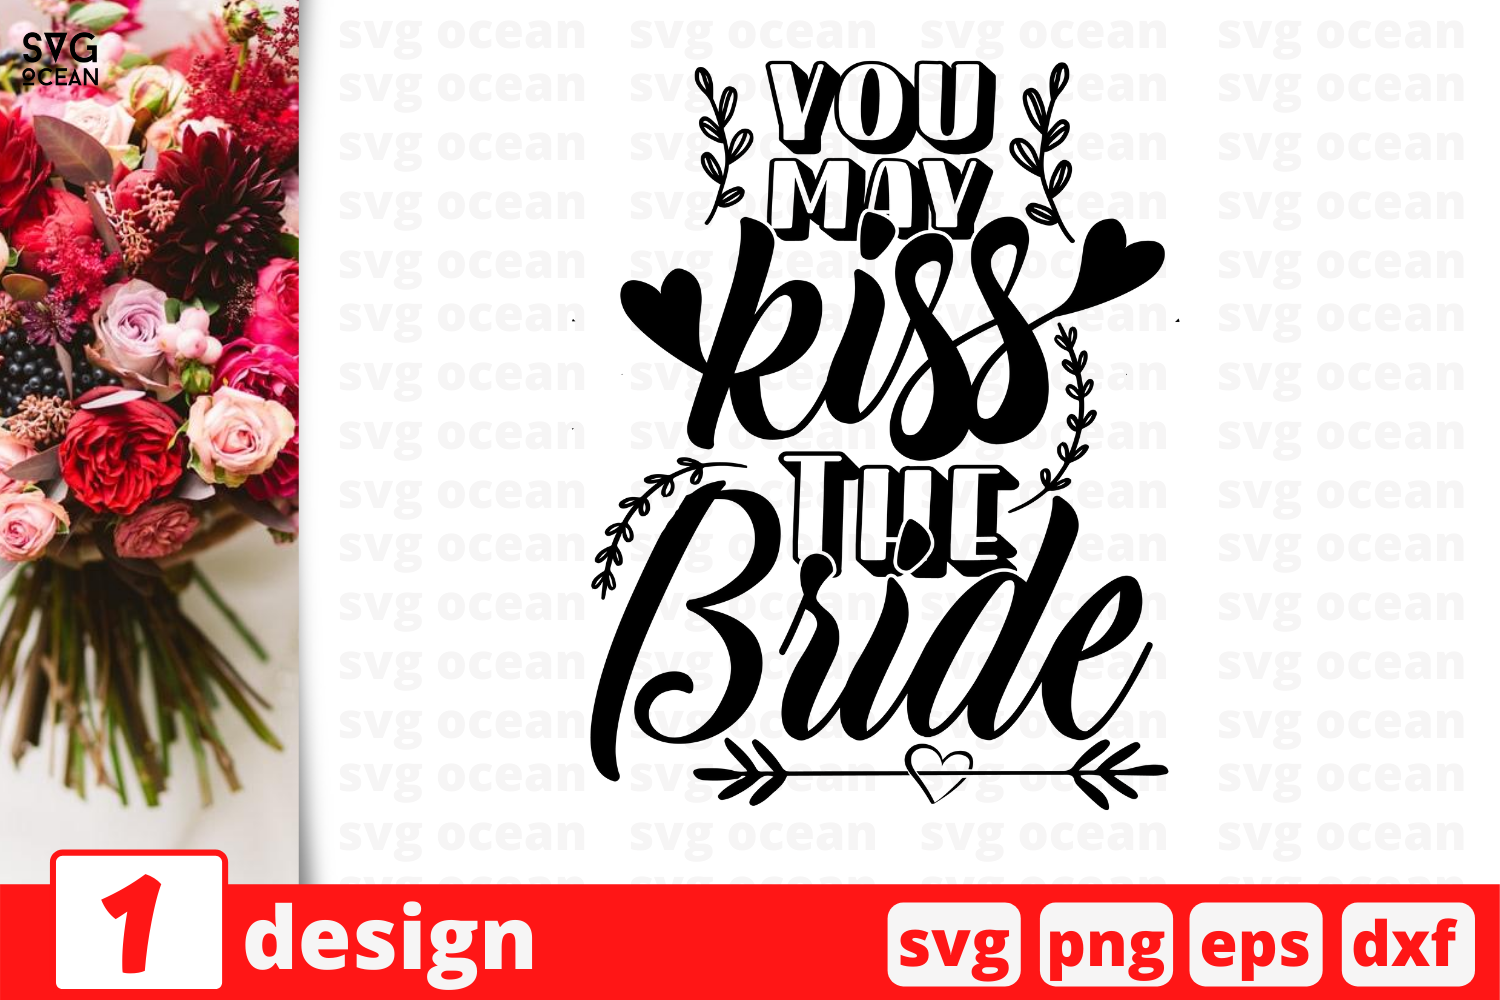 Download 1 You May Kiss The Bride Wedding Quotes Cricut Svg By Svgocean Thehungryjpeg Com